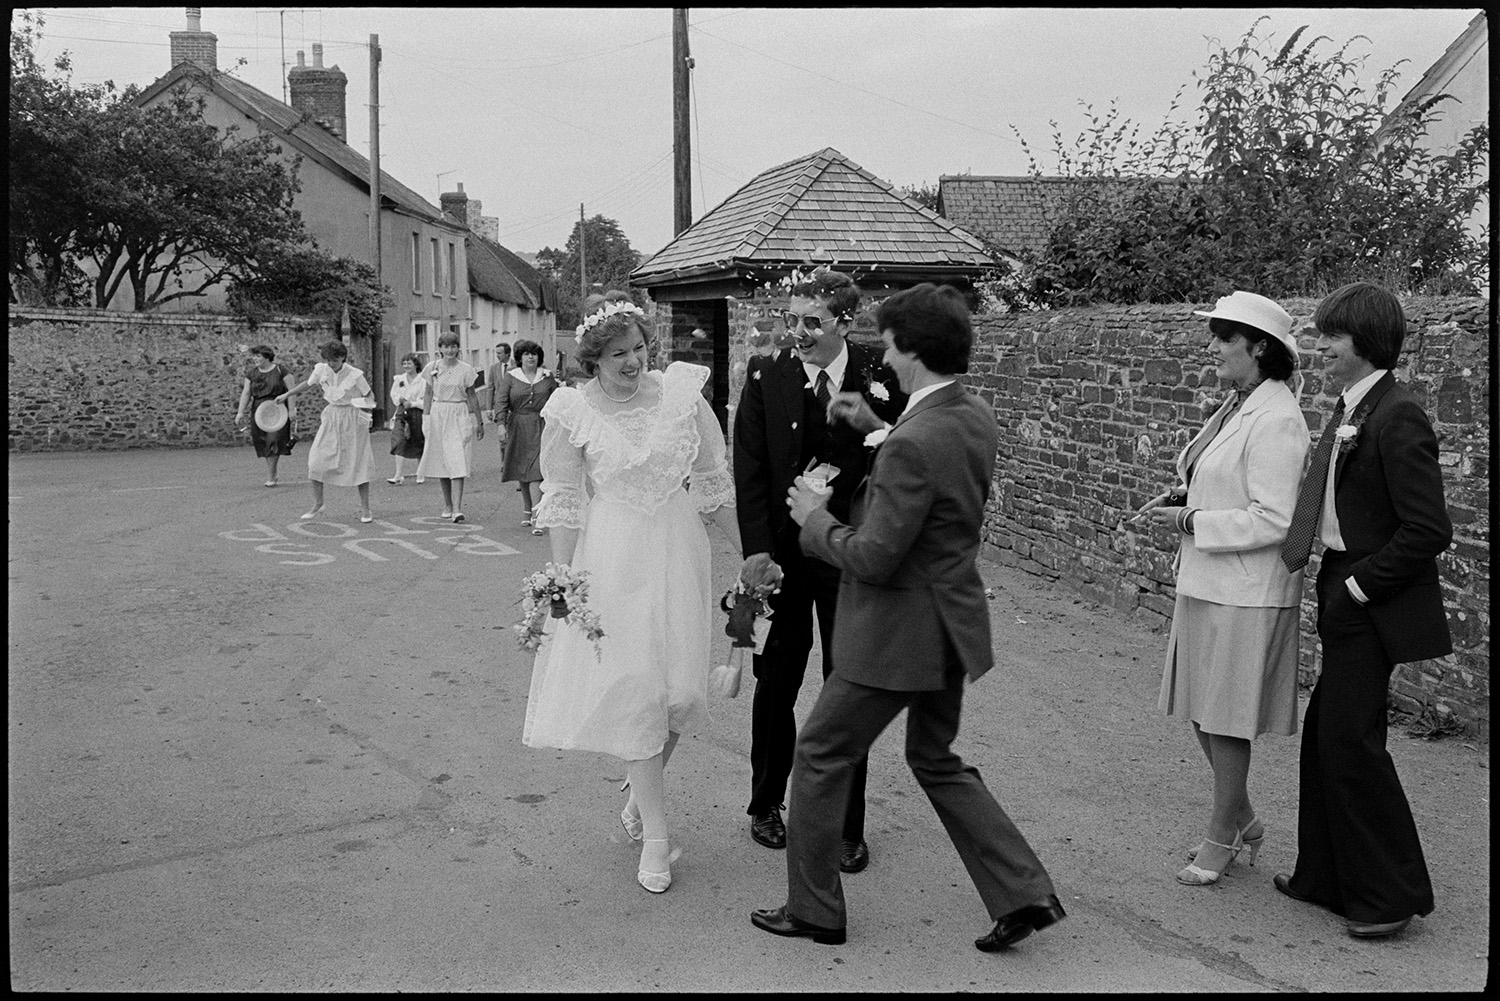 Wedding, groups, bride and groom leaving church, chatting to guests. 
[A man throwing confetti over Cynthia Palmer and her groom after their wedding in Dolton. They are walking along a street past a bus shelter. Other wedding guests are following them and watching.]